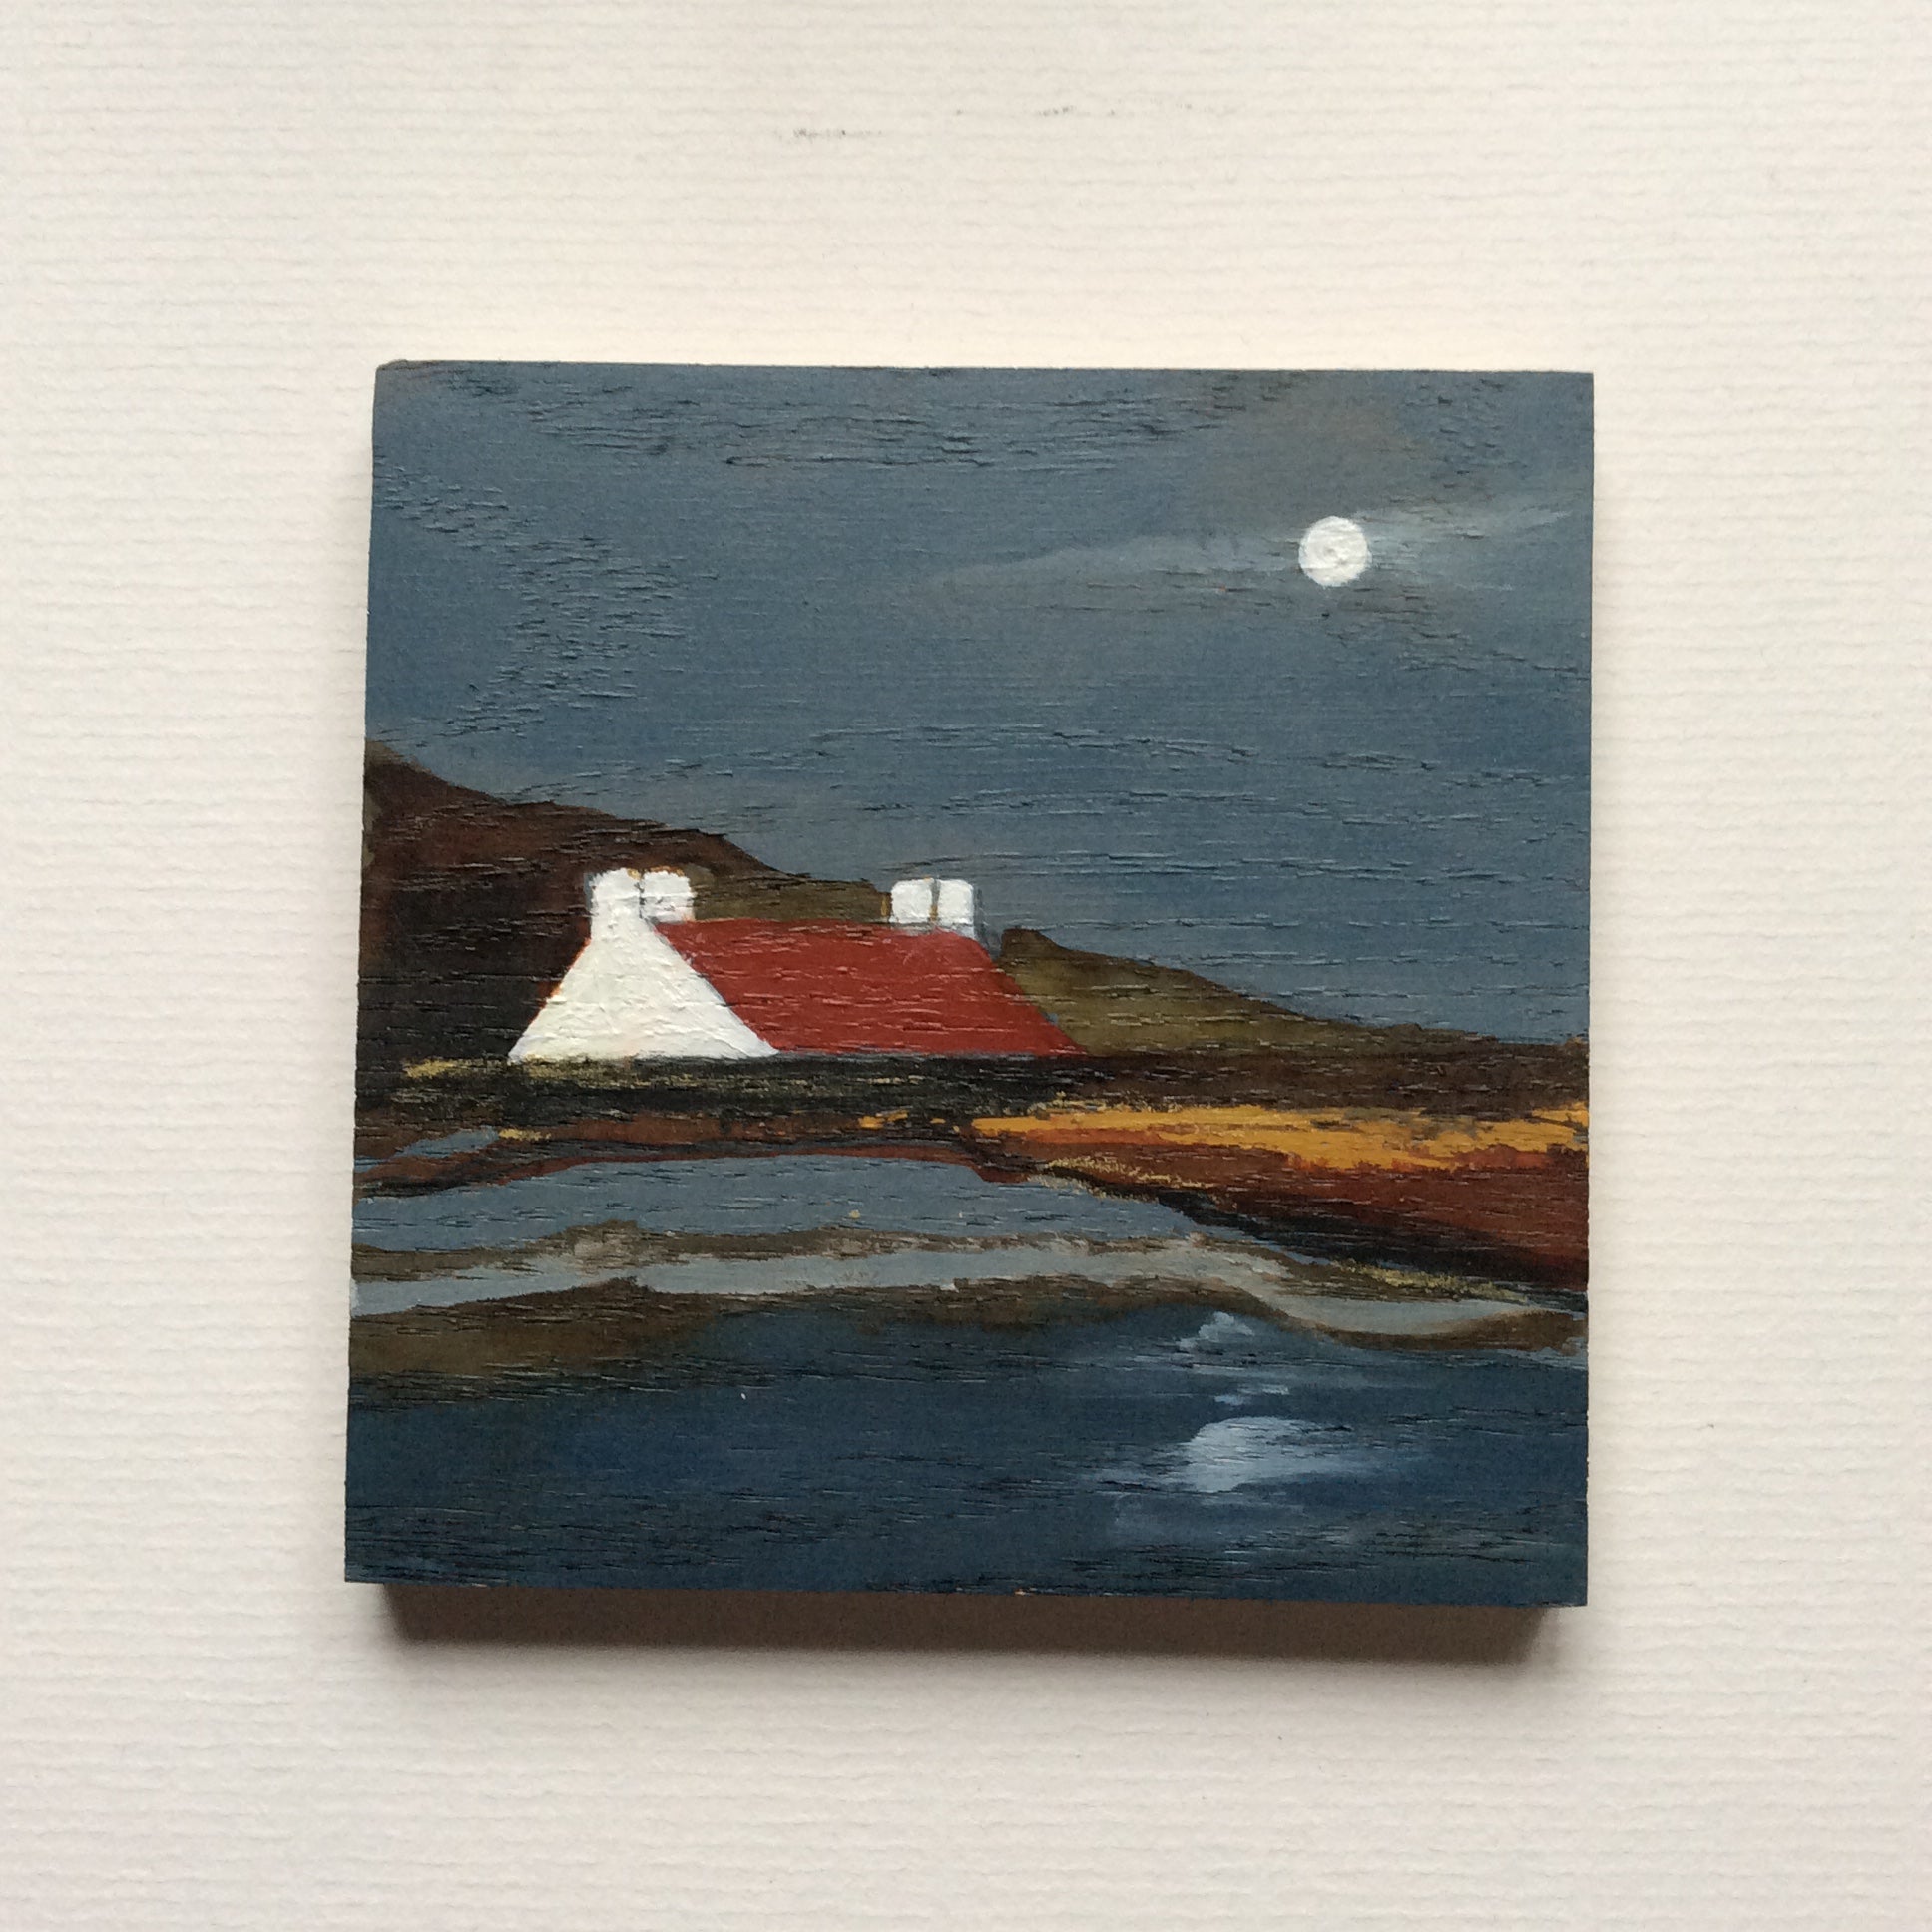 Mixed Media Art on wood By Louise O'Hara - "The Cottage with the red roof”